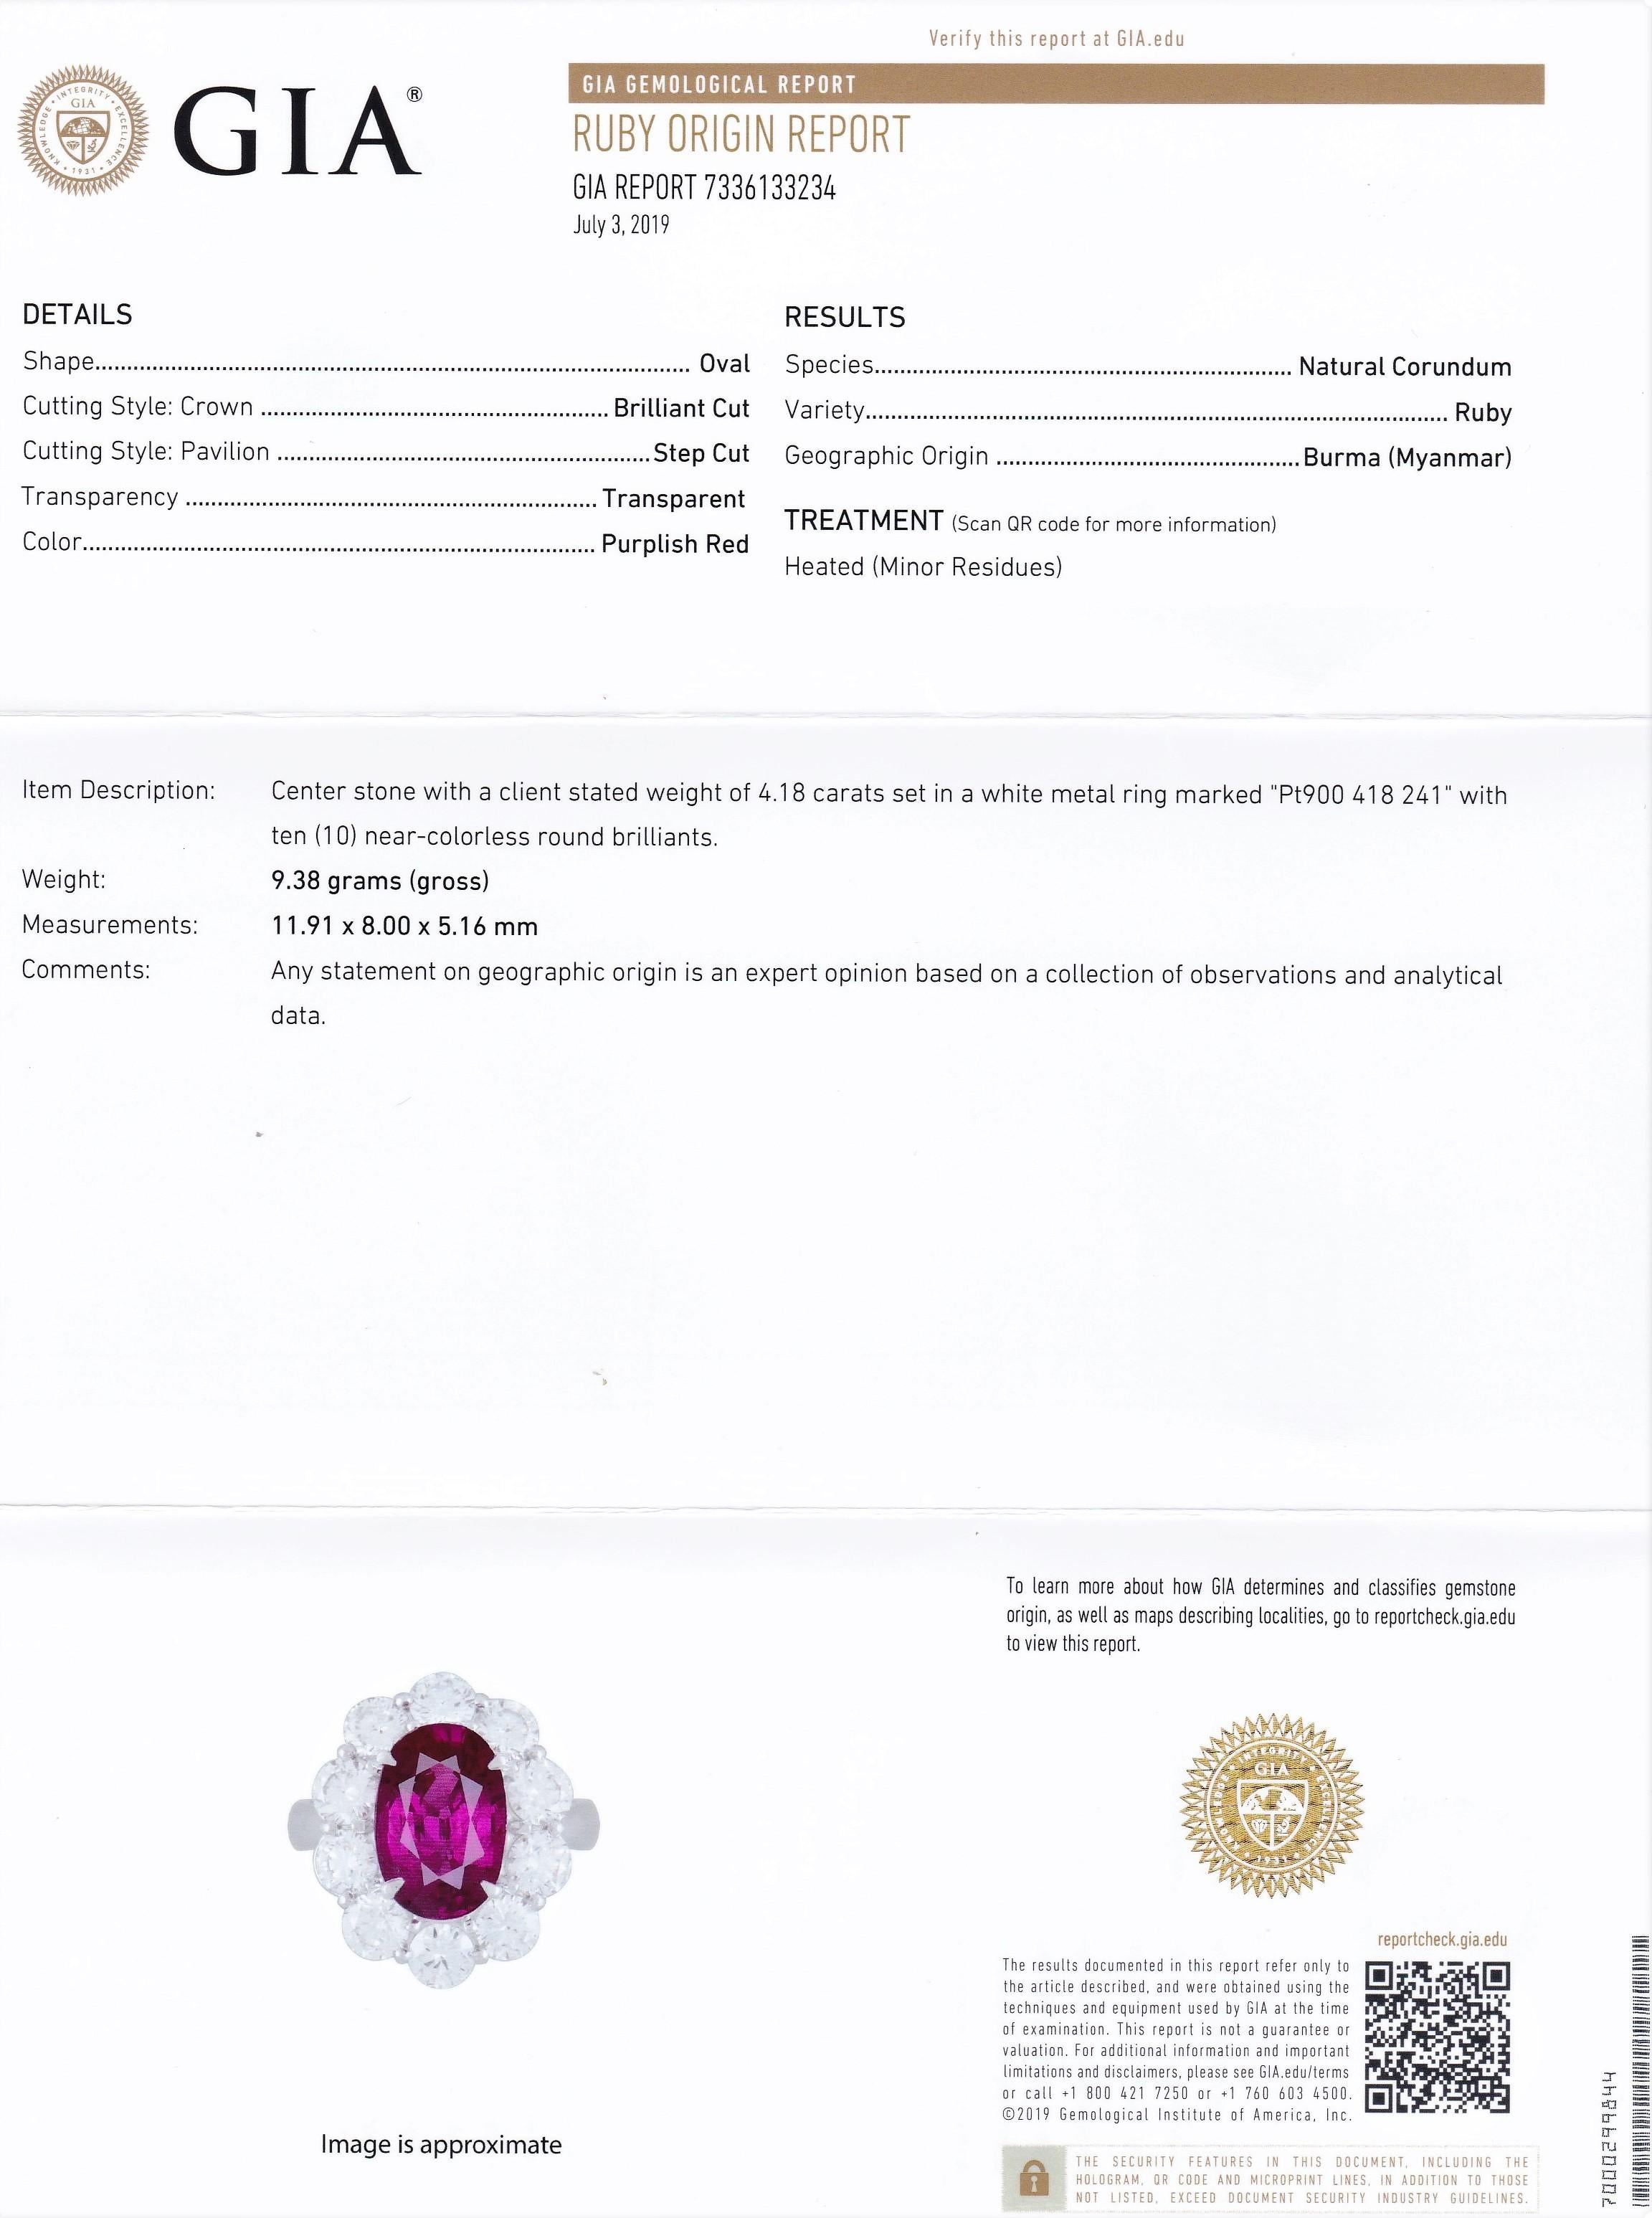 Oval Cut GIA Certified 4.18 Carat BURMA Ruby and 2.41 Carat Diamond Wedding Ring For Sale